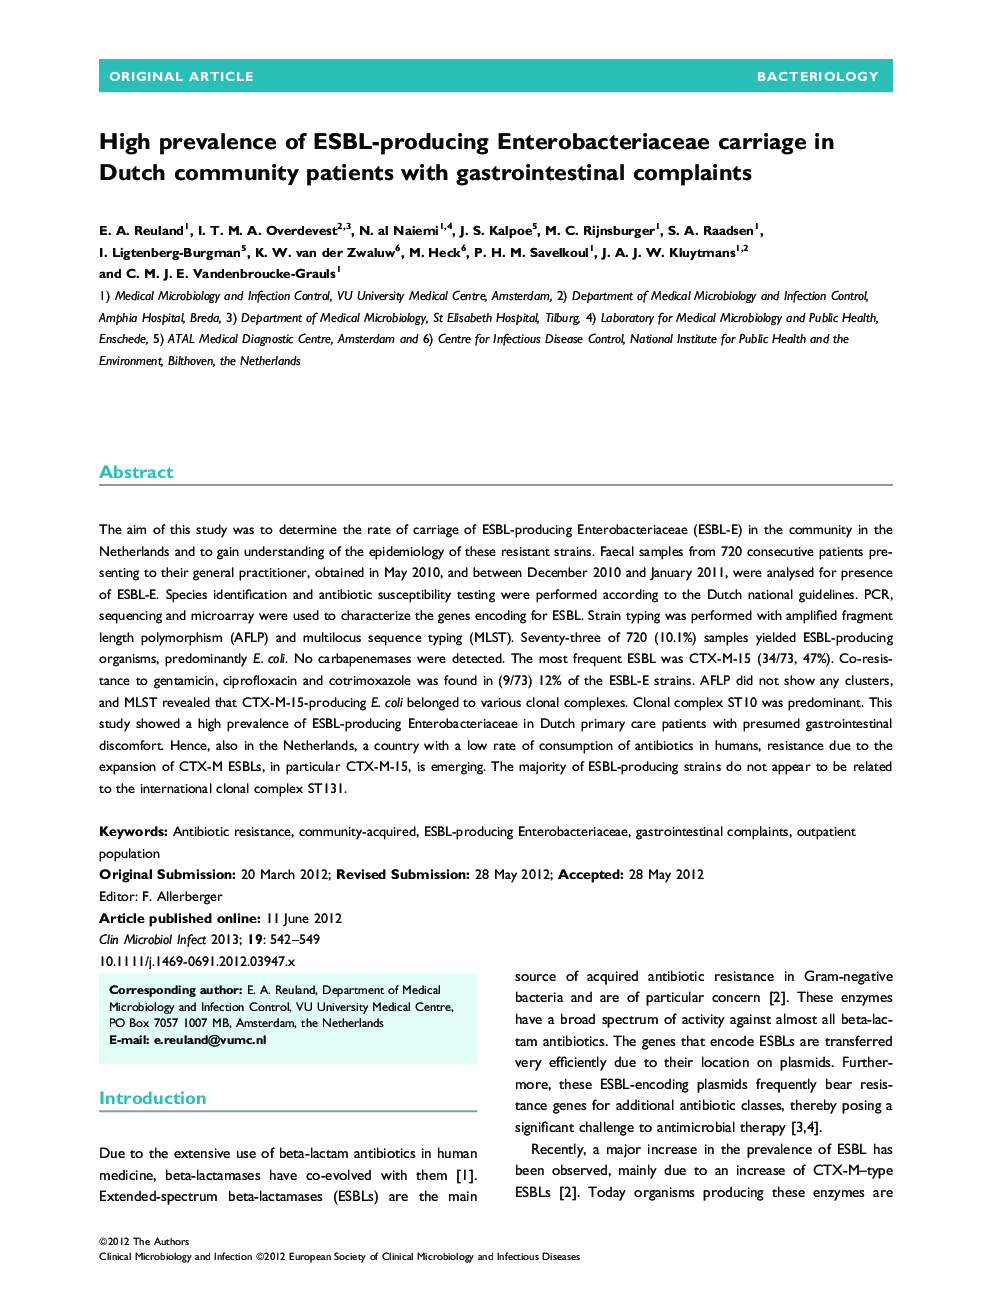 High prevalence of ESBL-producing Enterobacteriaceae carriage in Dutch community patients with gastrointestinal complaints 